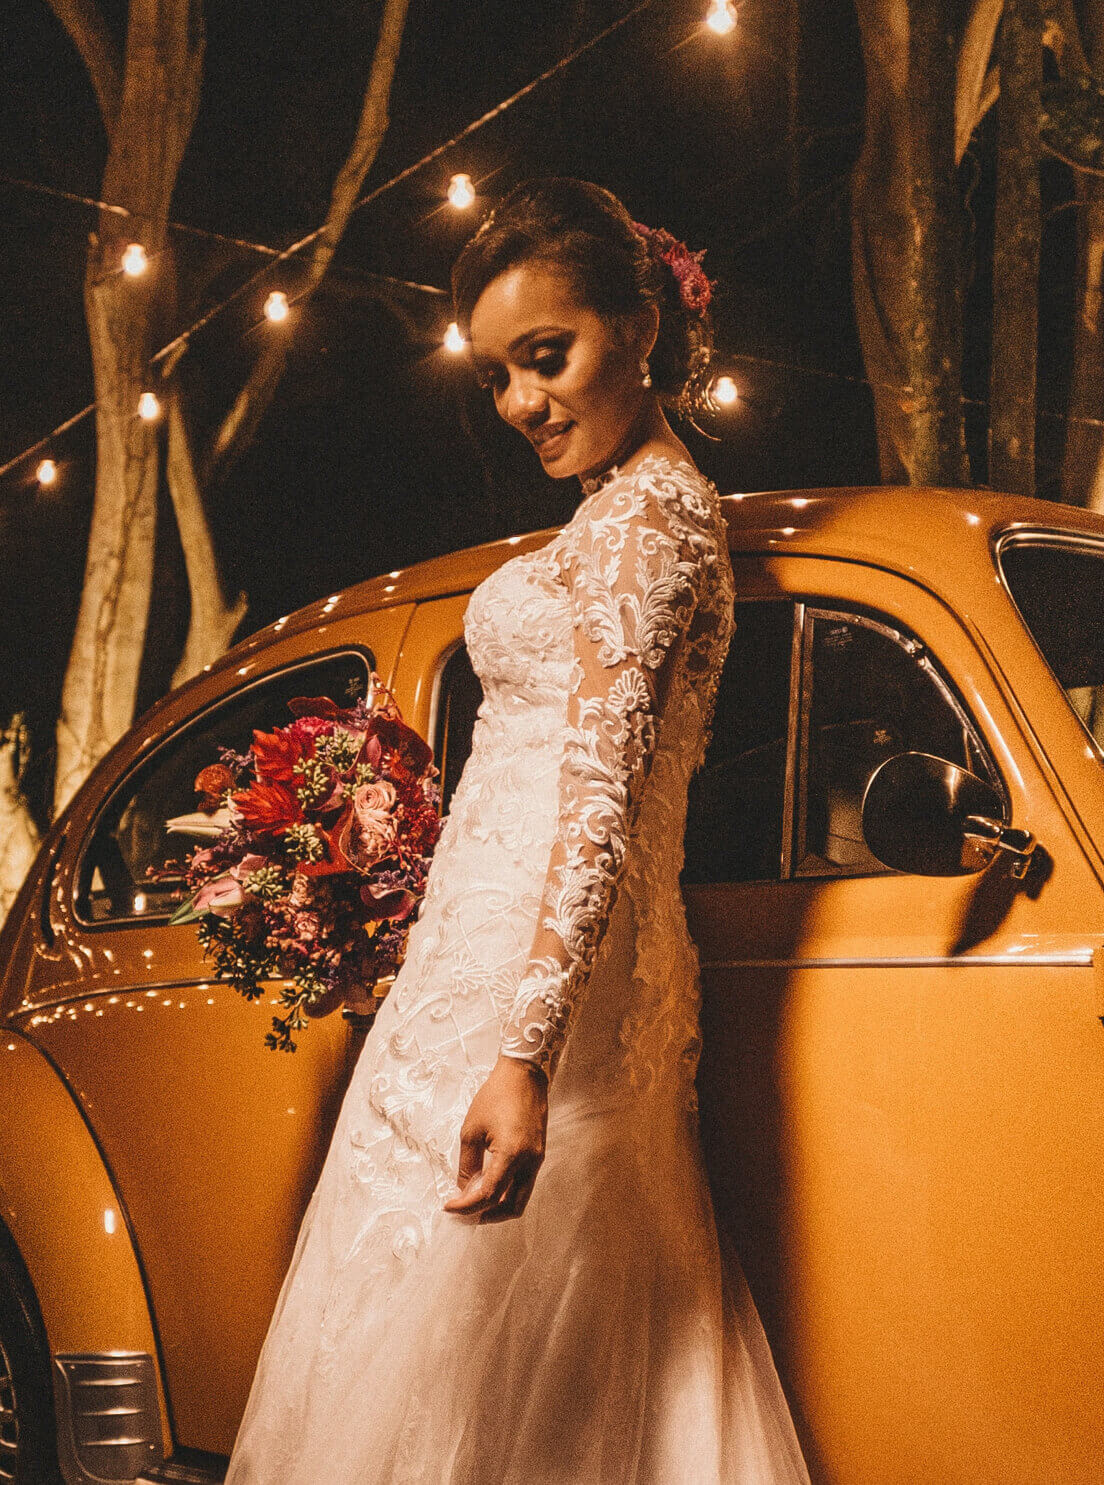 Photo of a woman in a wedding dress, standing next do a Volkswagen Bug